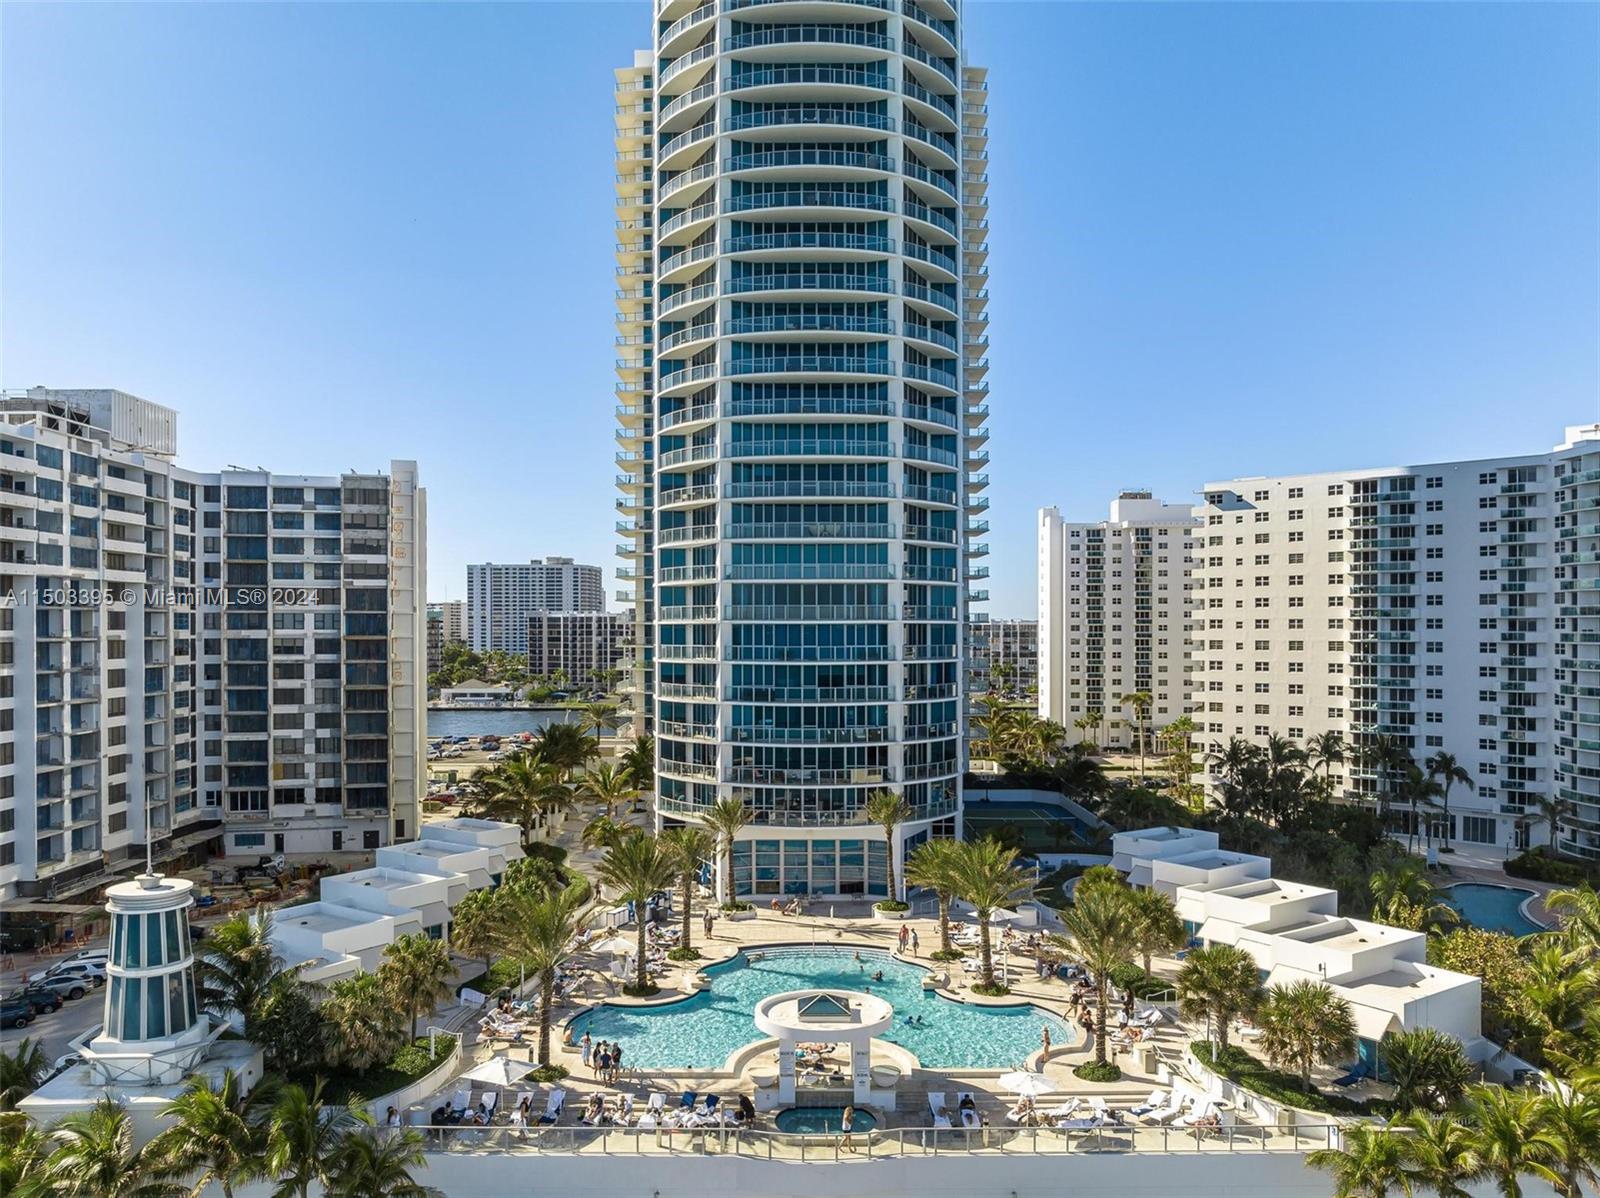 Photo of 3101 S Ocean Dr #1001 in Hollywood, FL